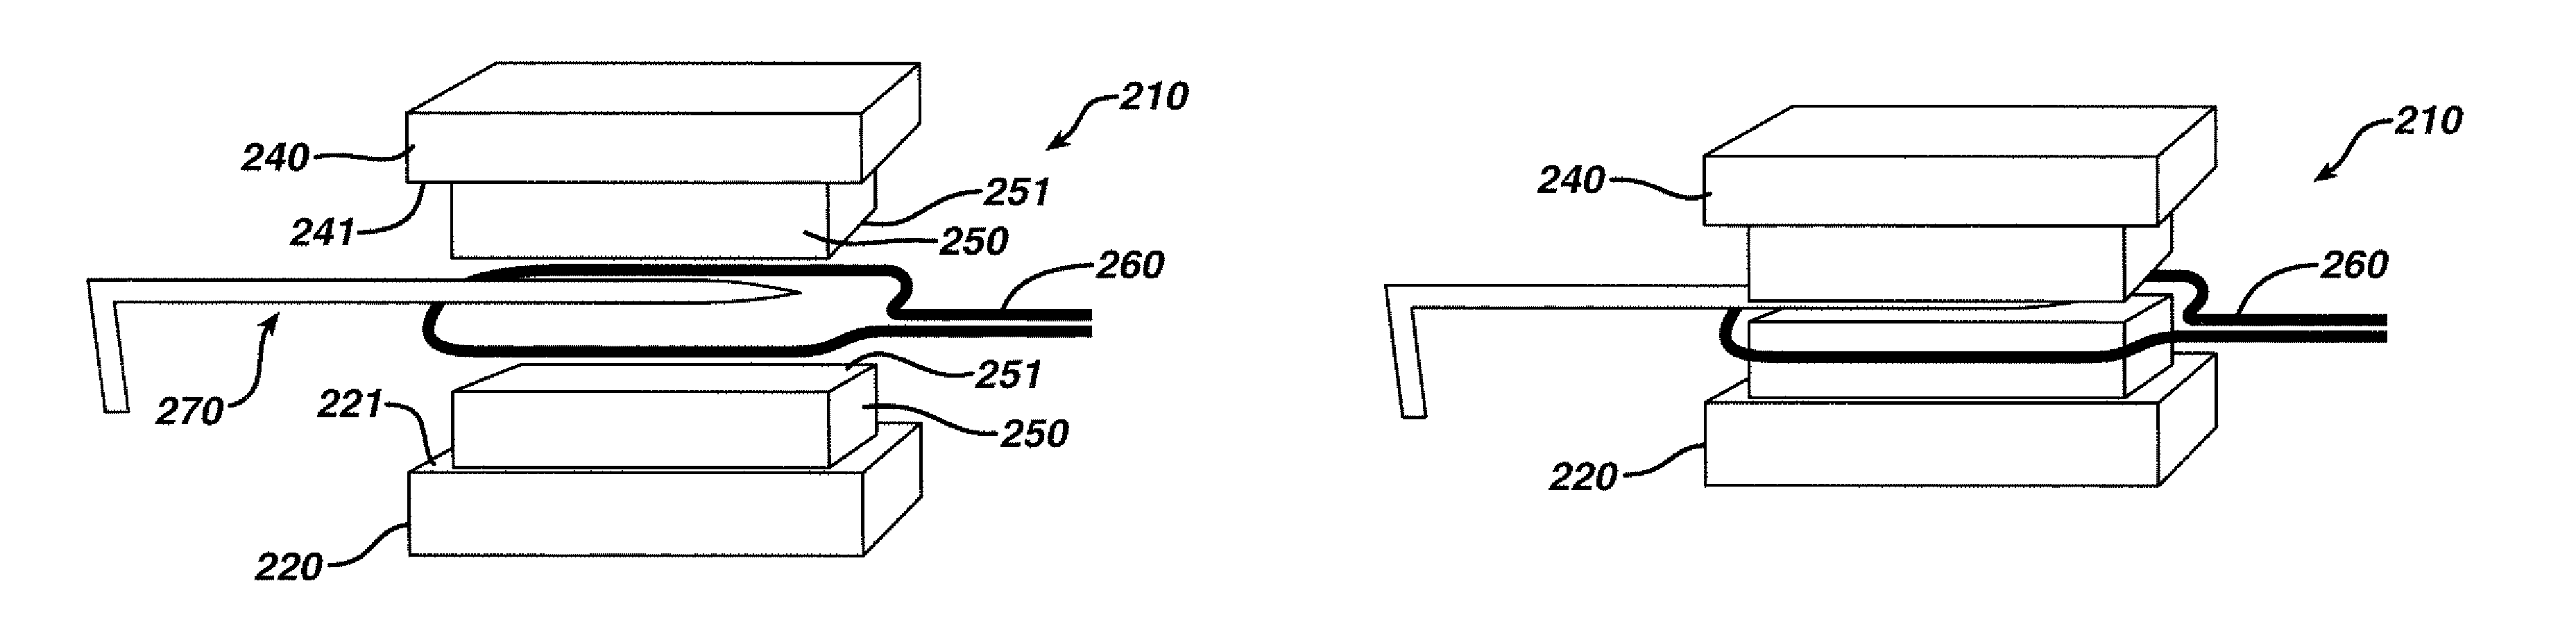 Thermal forming of refractory alloy surgical needles and fixture and apparatus